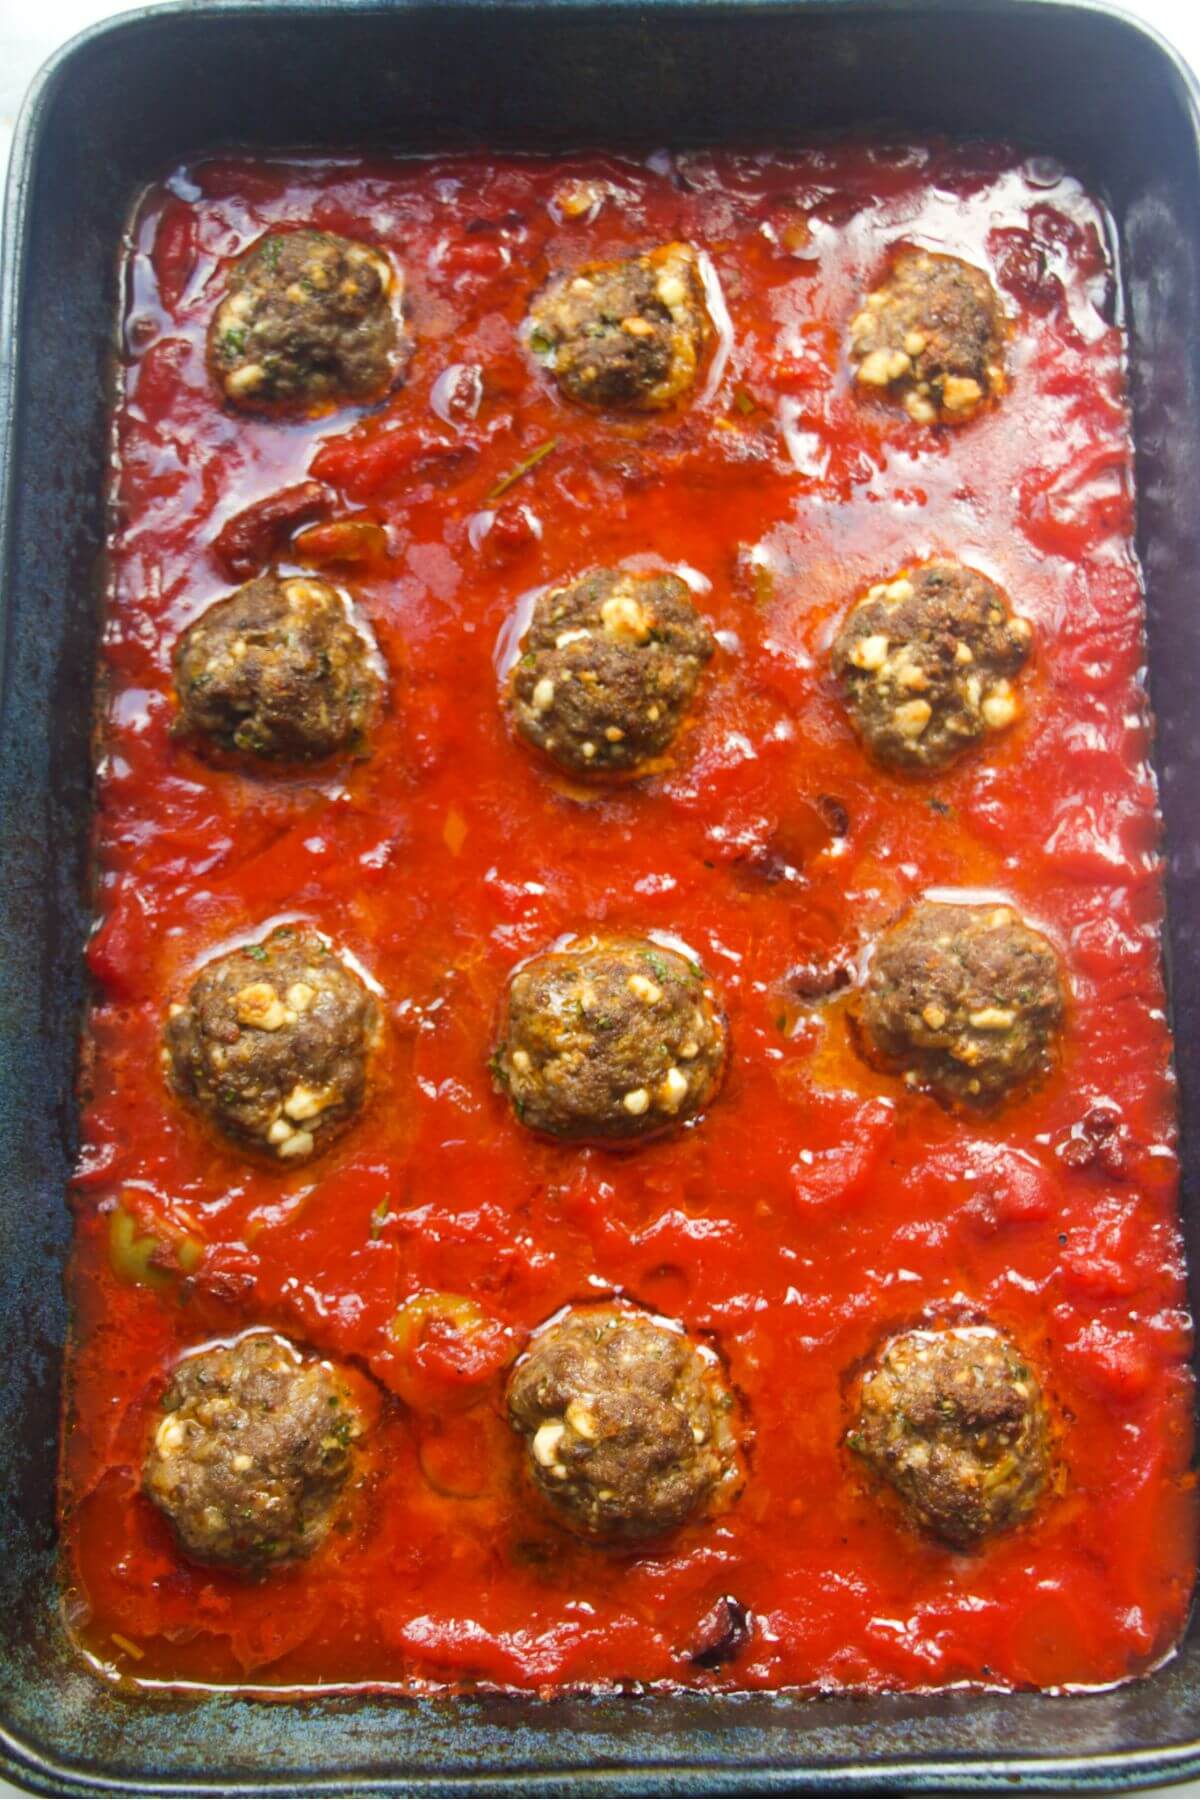 12 par-cooked meatballs in tomato sauce in a large blue oven dish.